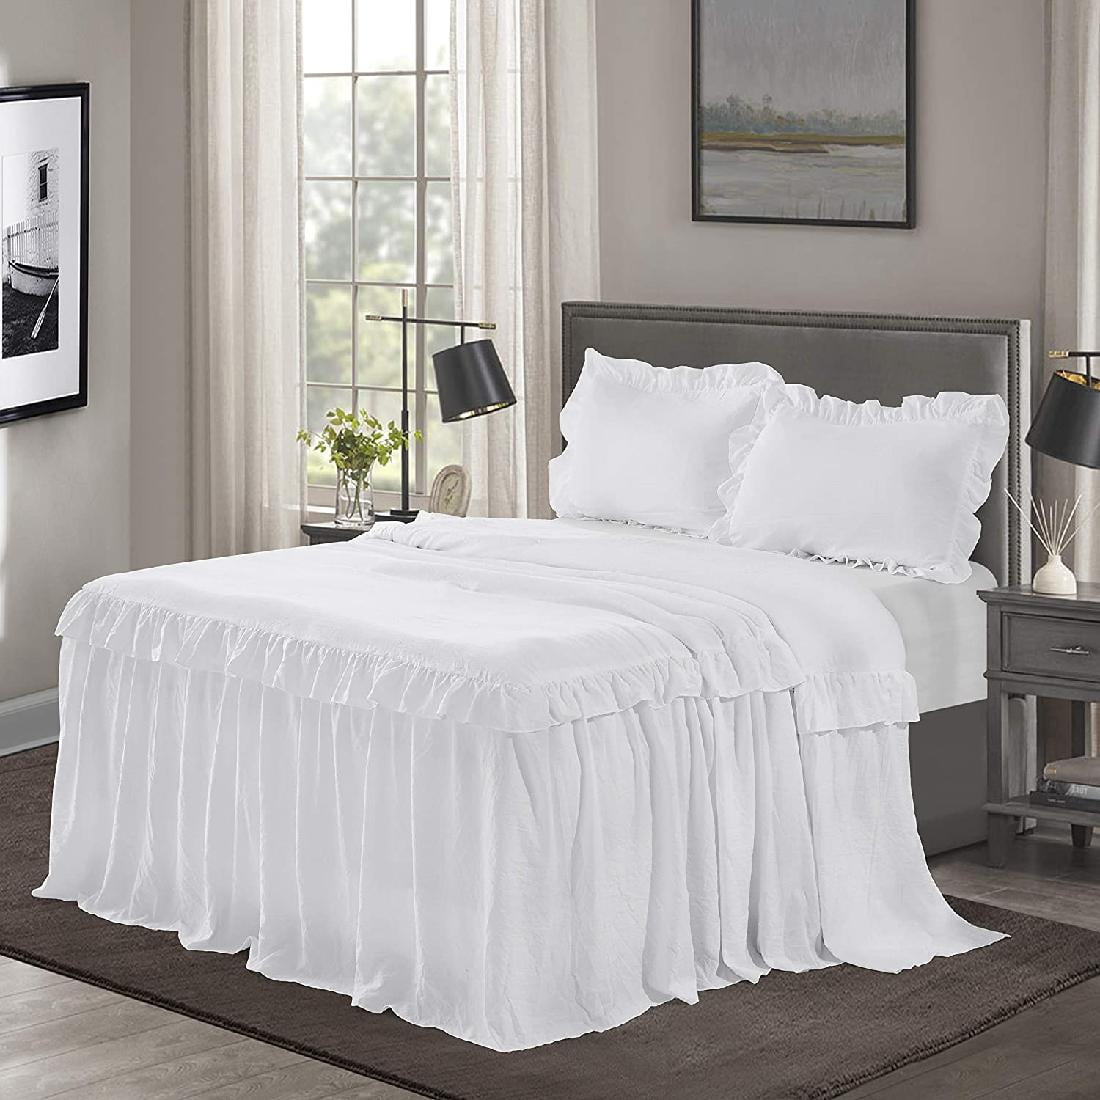 Ruffle Skirt Bedspread Set King - 30 inches Drop Ruffled Style Bed ...